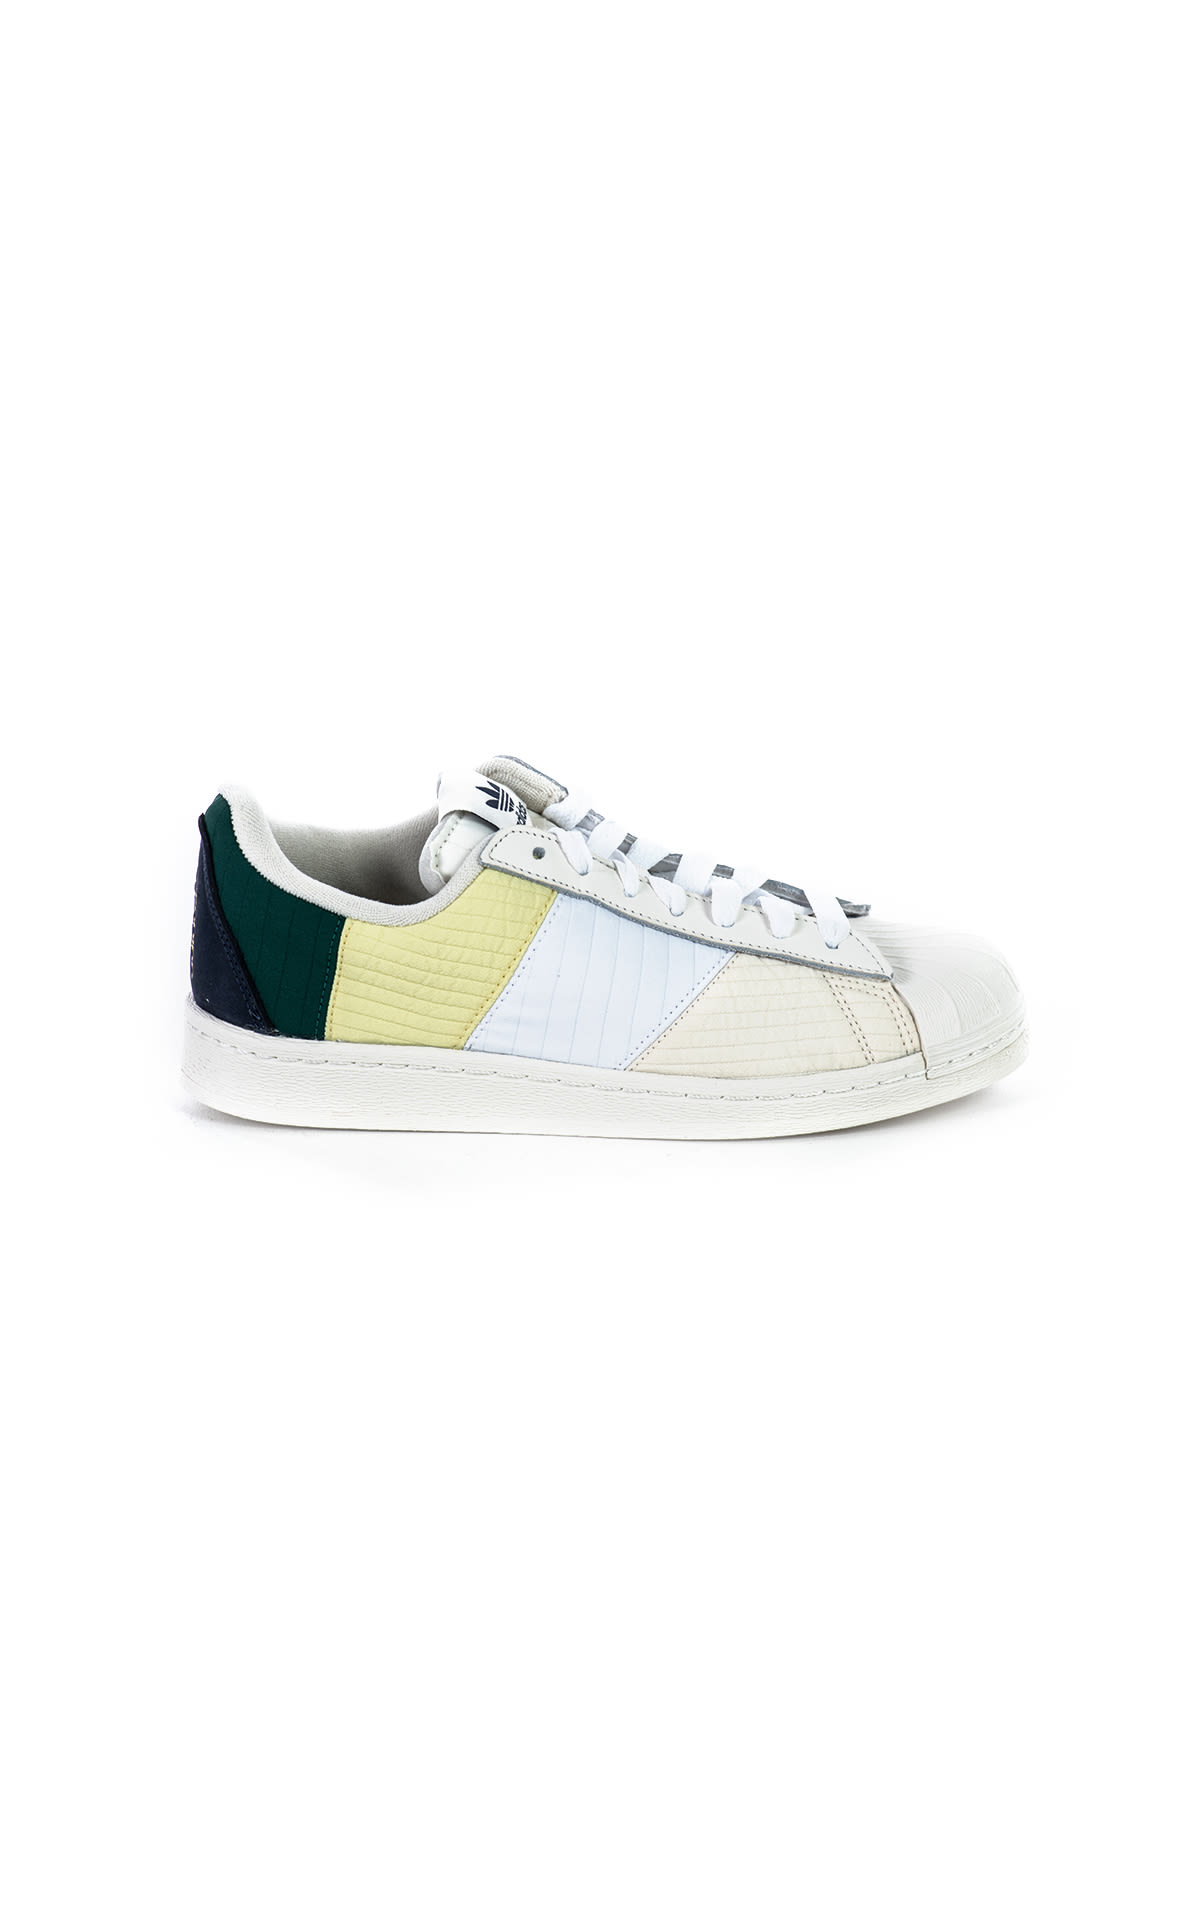 Adidas Superstar 82 Panel Shoes